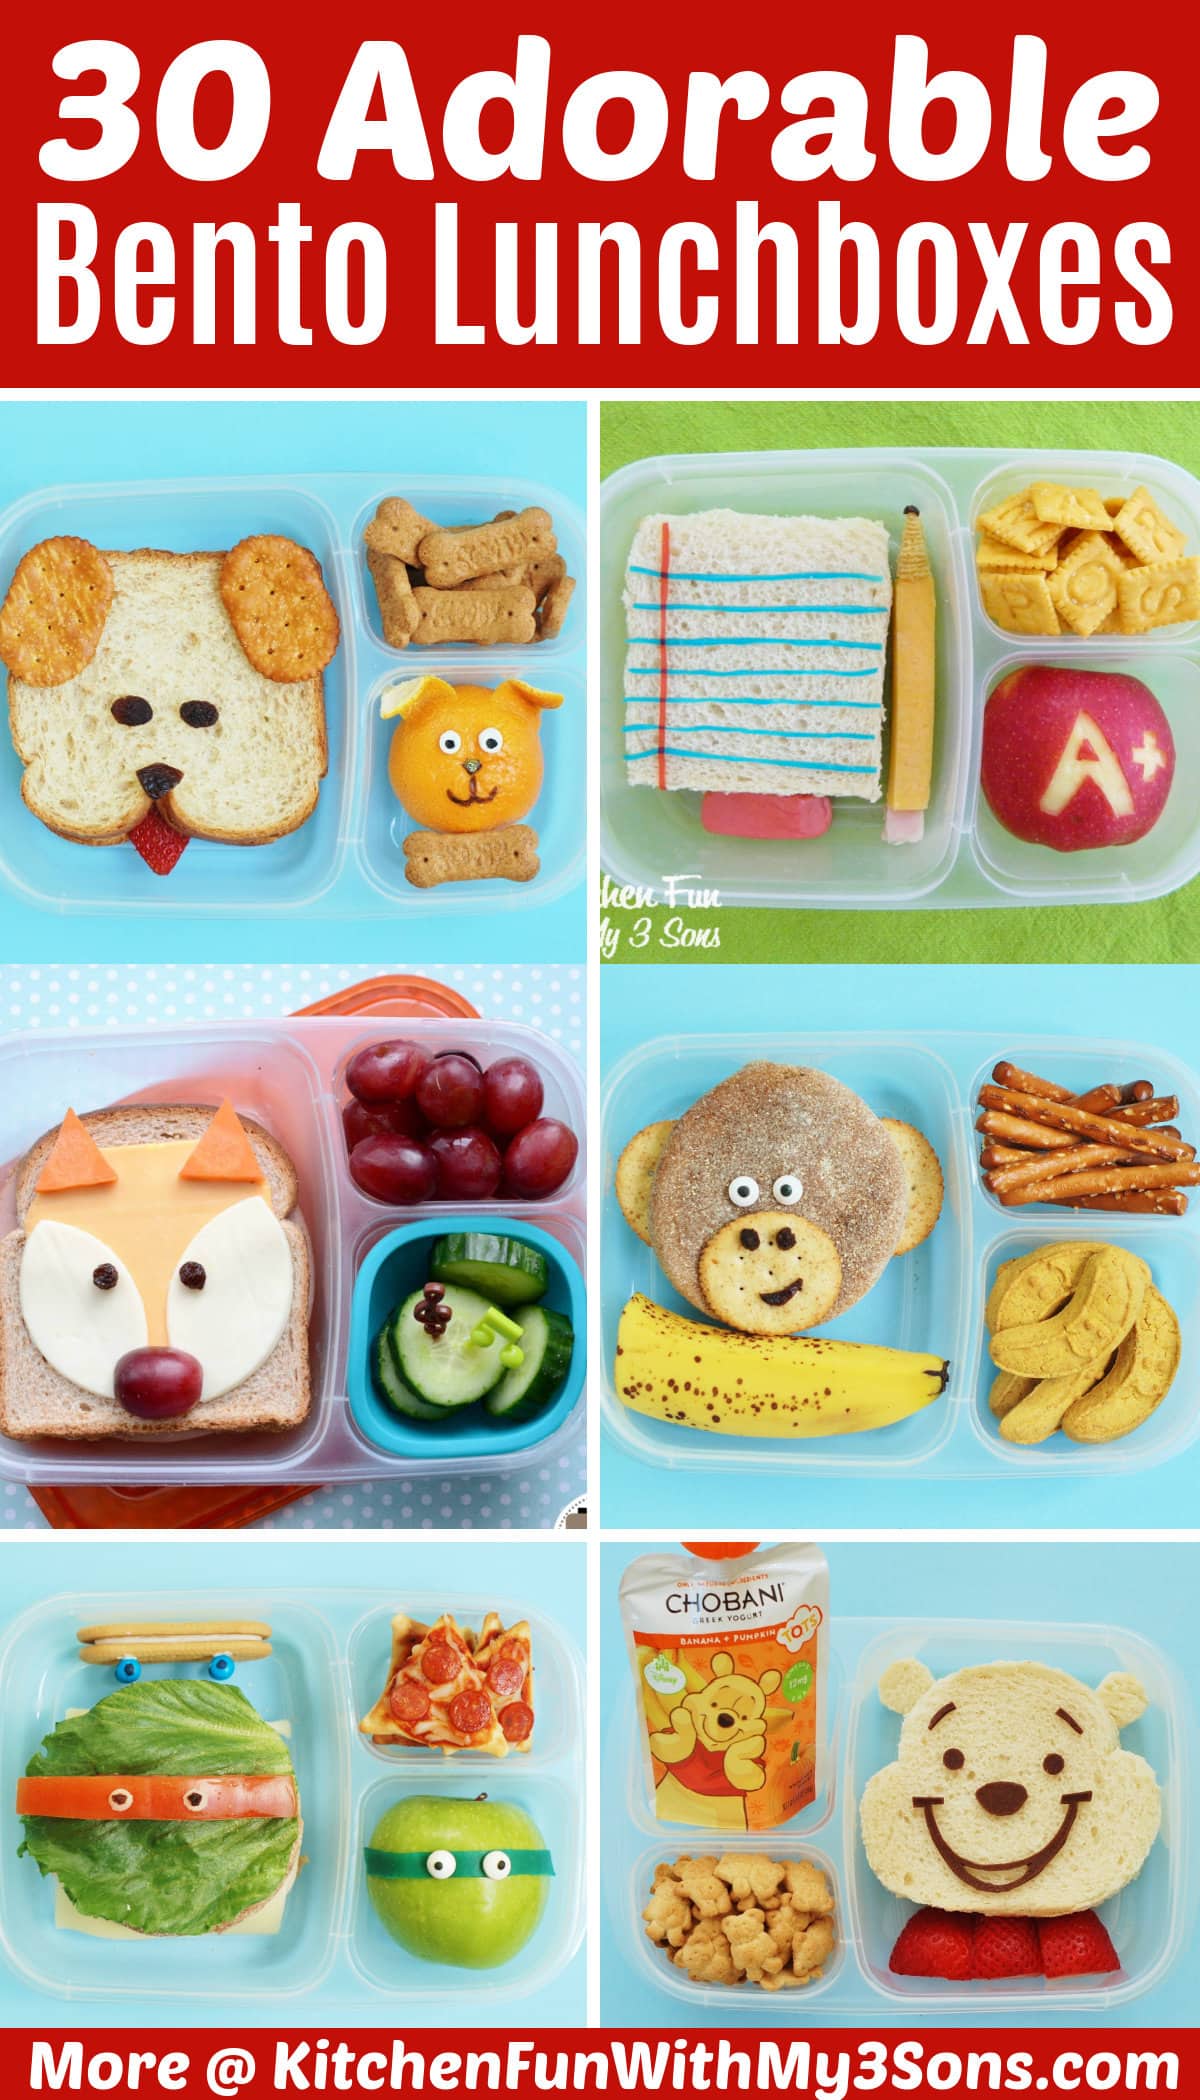 https://kitchenfunwithmy3sons.com/wp-content/uploads/2014/08/bento-lunchbox-ideas-pin.jpg